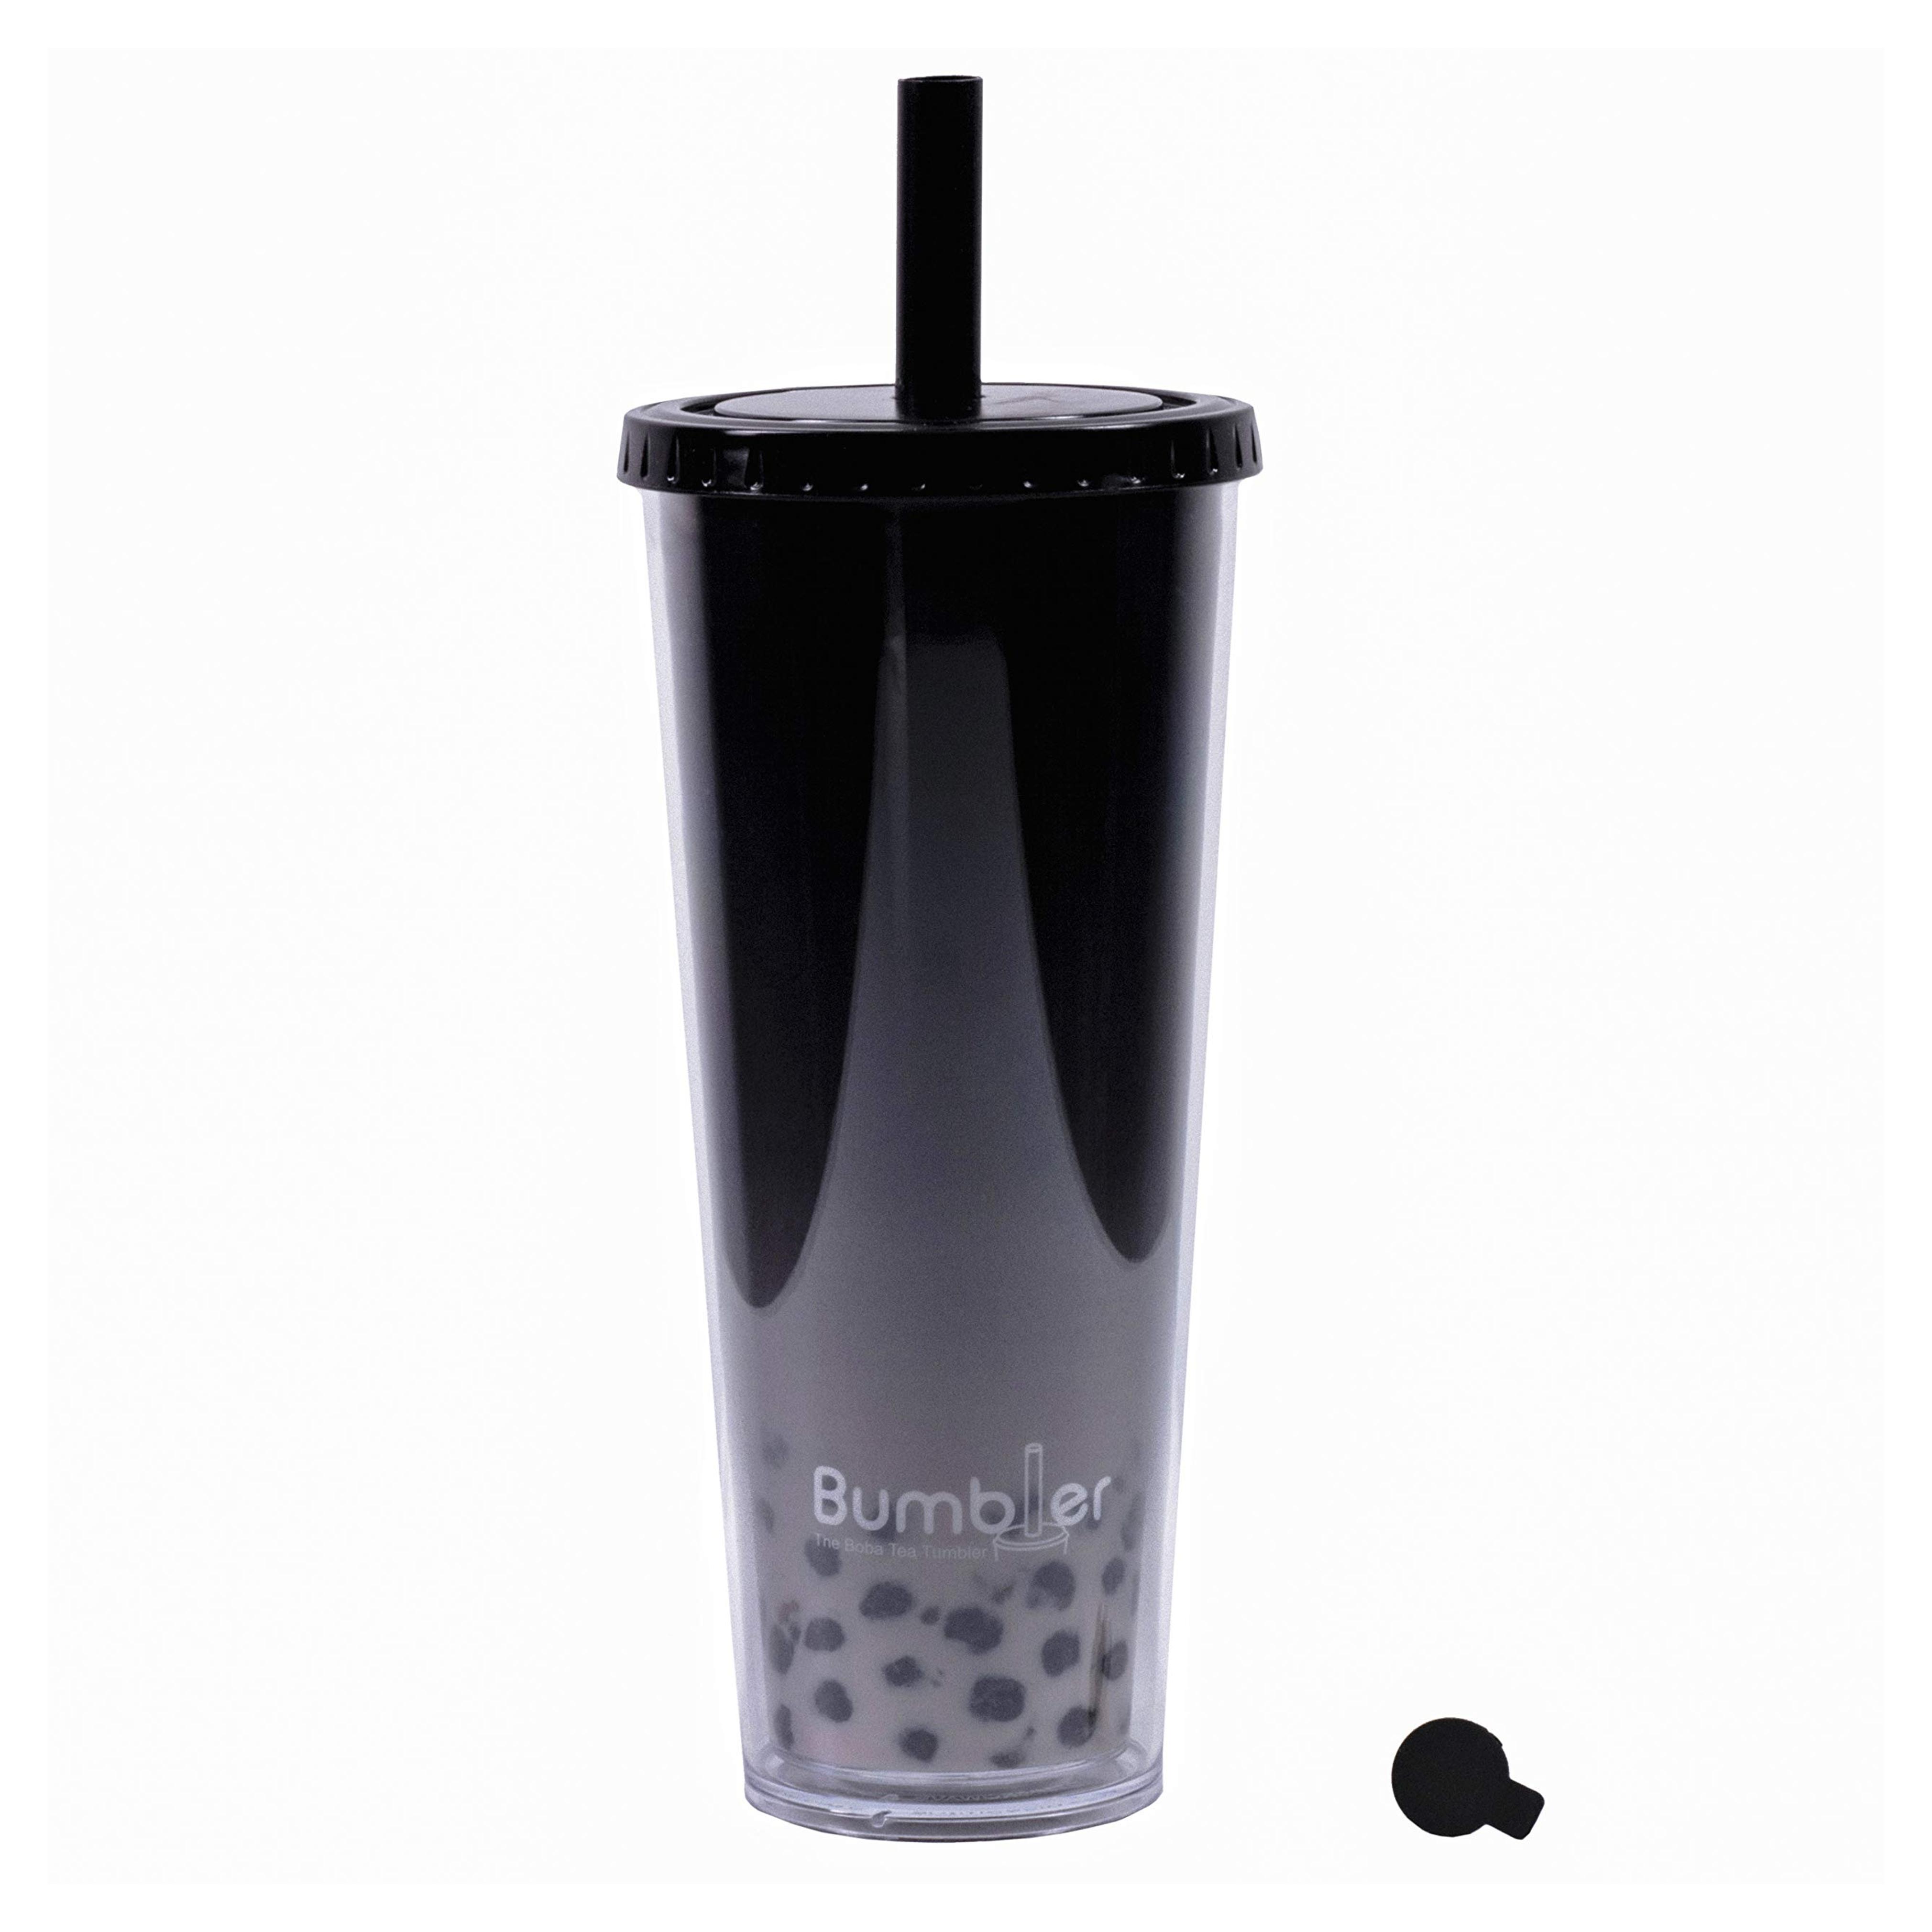 BUMBLER Original Boba Tea Tumbler - Black - SMOOTHFlow Wide Smoothie Straw & Plug - Upgraded Durability - Keeps Drinks Cold/Hot - 2x Vacuum Insulated Pearl Milk Bubble Tea Cup - 24 Oz Tumbler